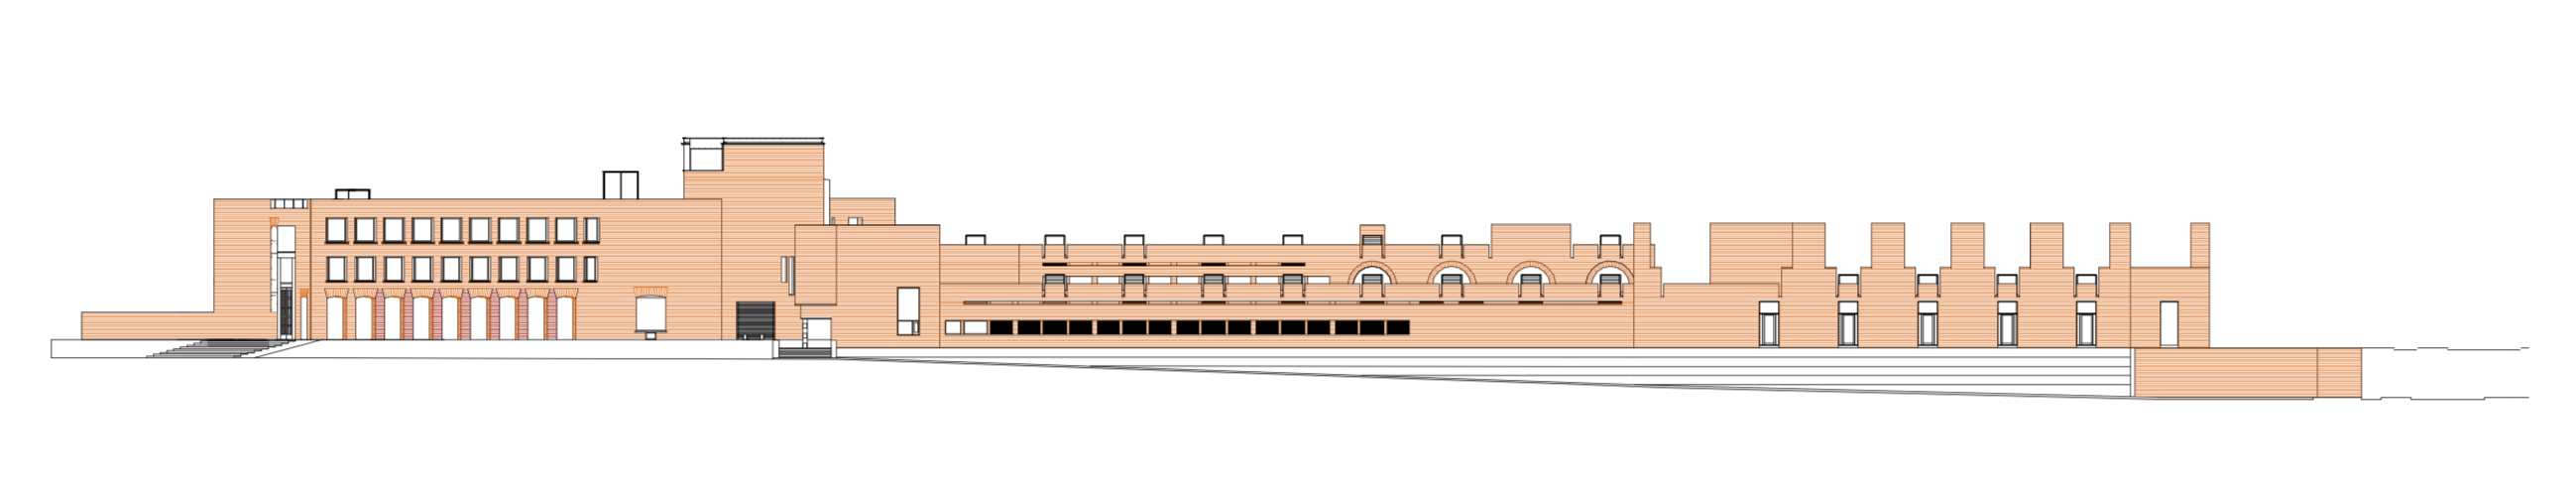 02 Elevation drawing 1